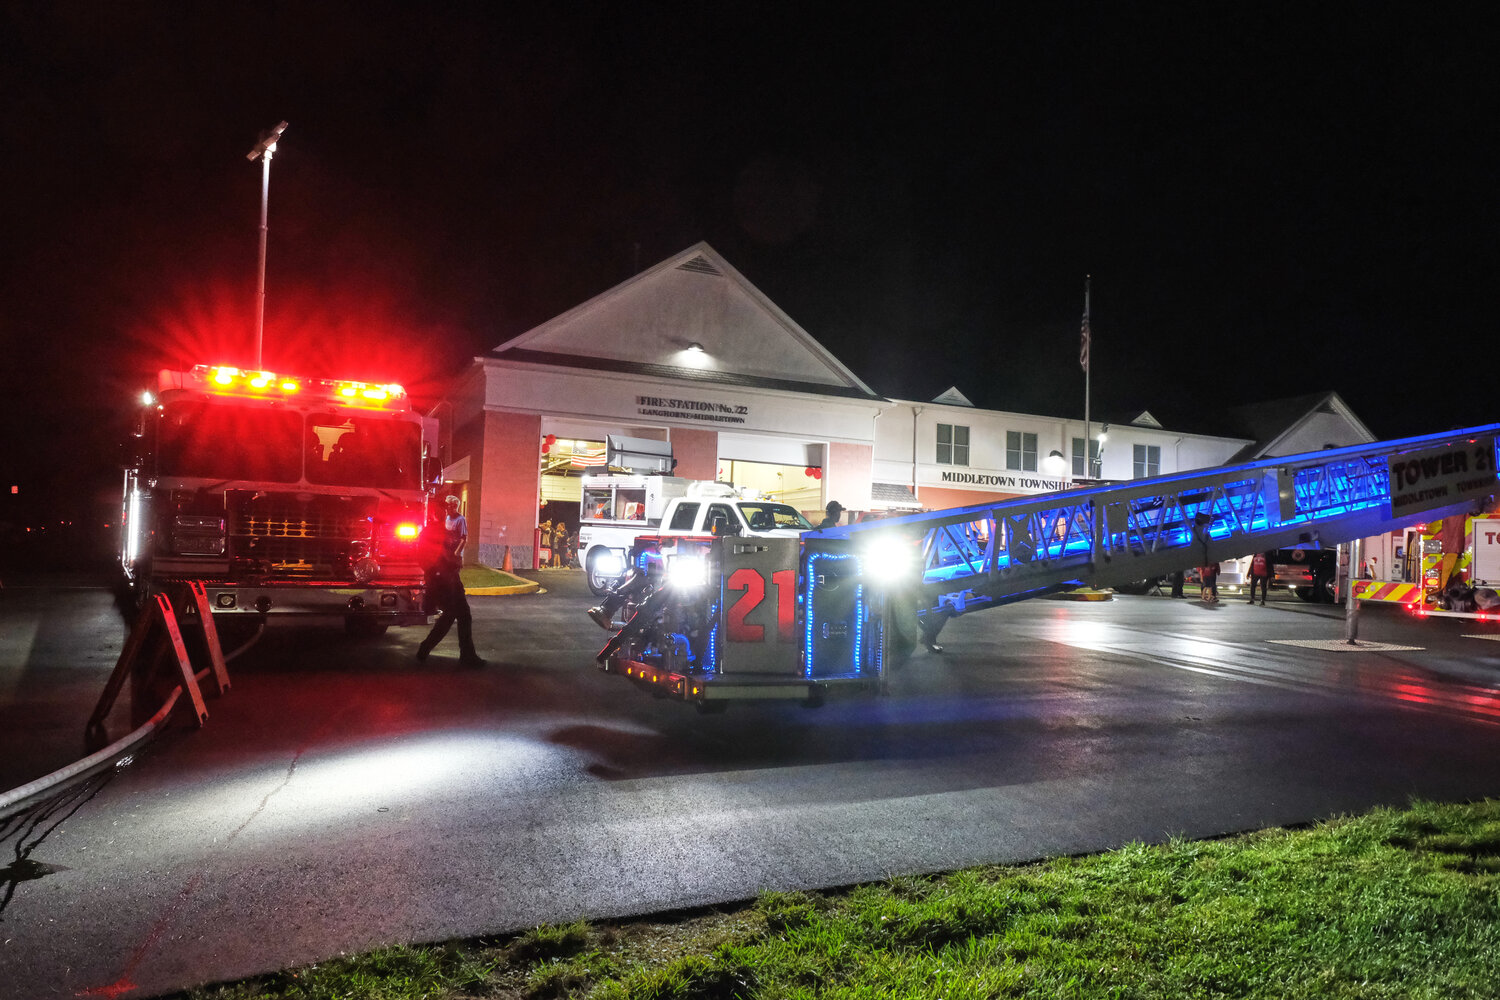 Red, white and blue lights bathe the Langhorne-Middletown Fire Co firehouse in a patriotic glow.